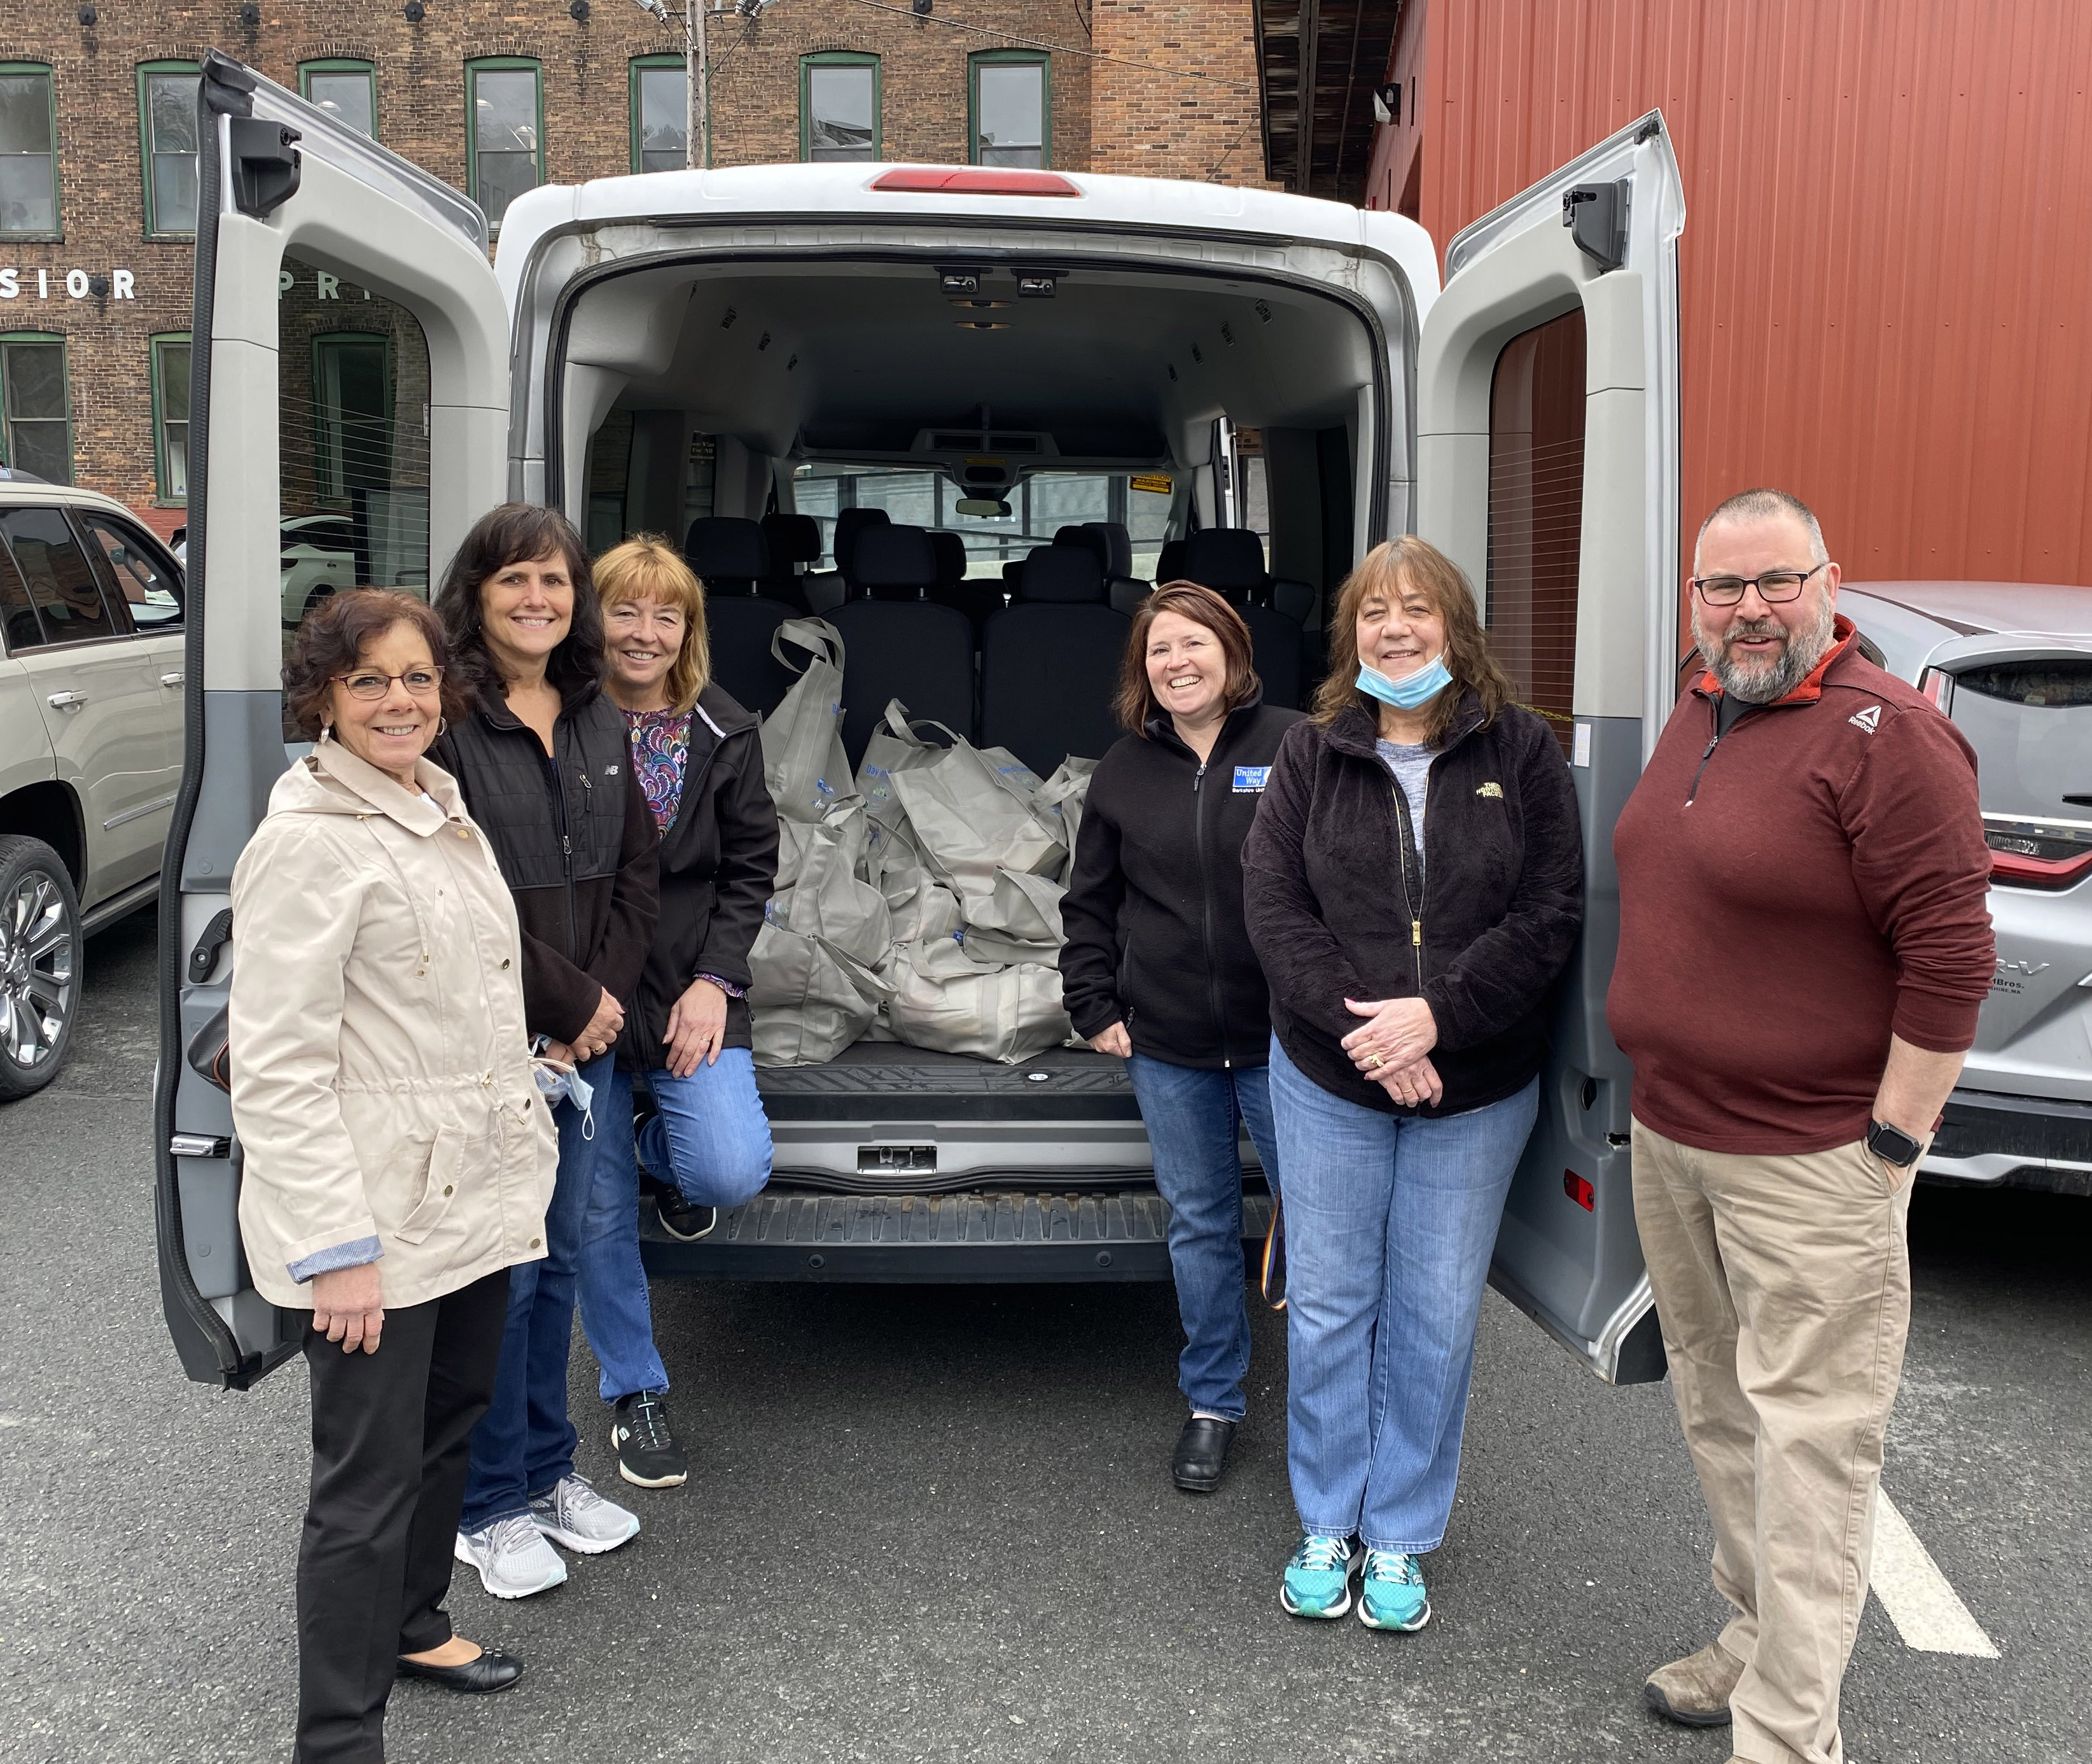 Patti Messina (NBUW), volunteers Michelle Sylvester and Aleta Moncecchi, Brenda Petell (BUW), volunteer Karen Labombard, and Tom Bernard (BUW) get ready to deliver bags on May 3